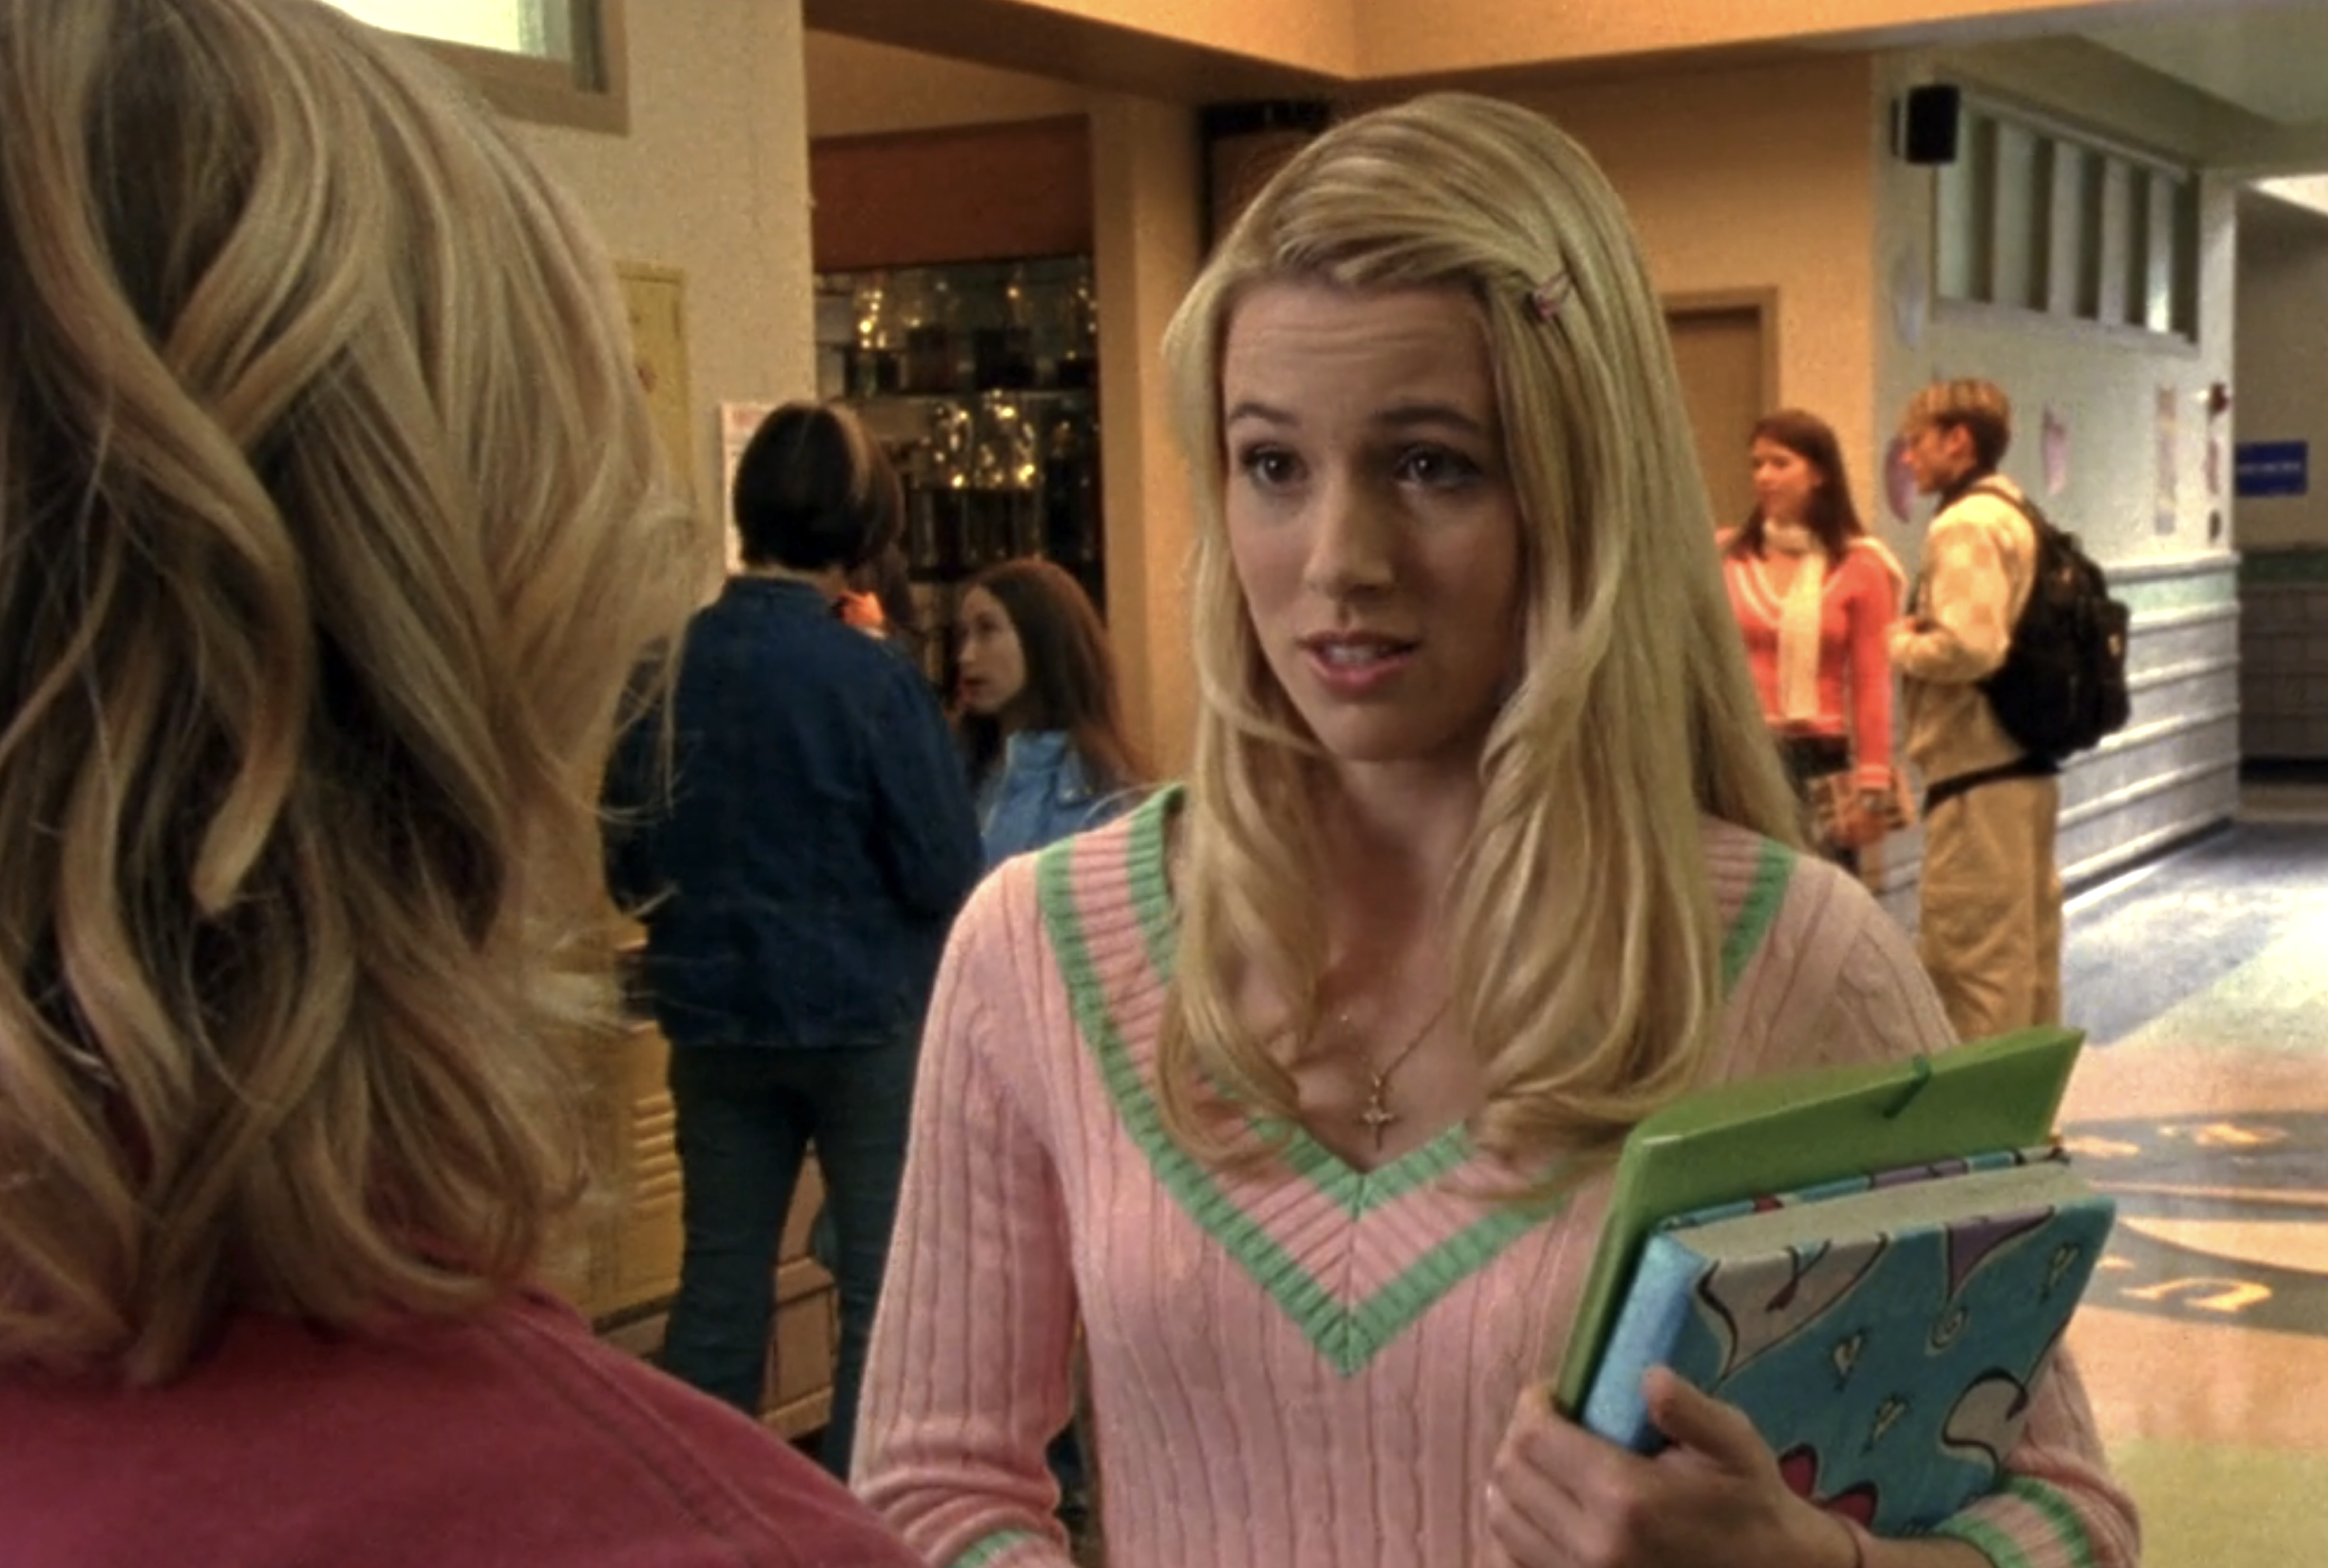 Screenshot from Veronica Mars S1E15. Meg in a pink sweater with green stripes is looking incredulously at Veronica.